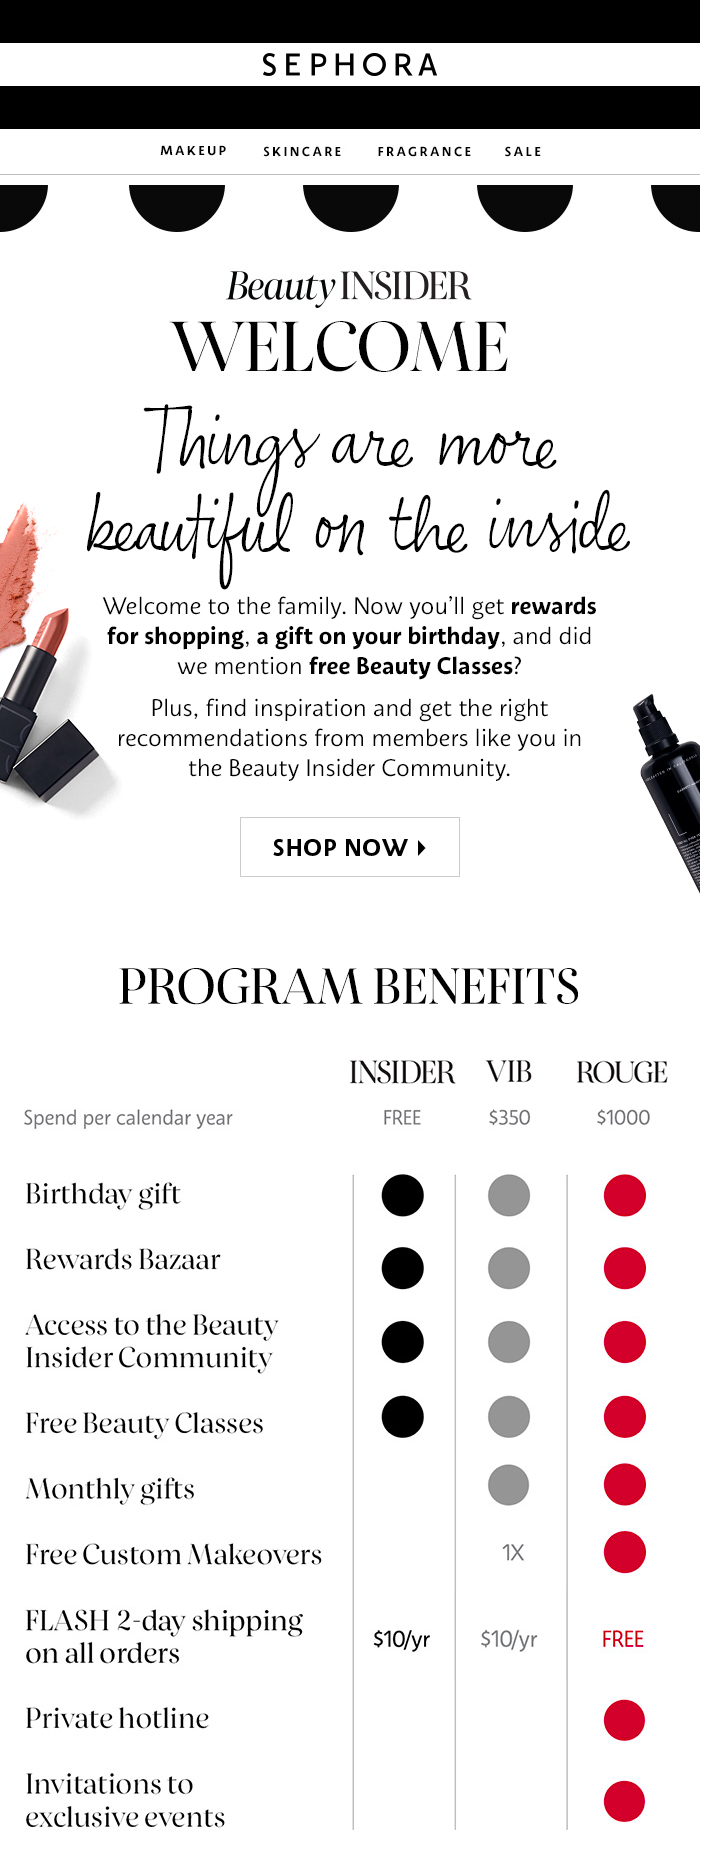 Sephora – Marketing Automation – Welcome Email